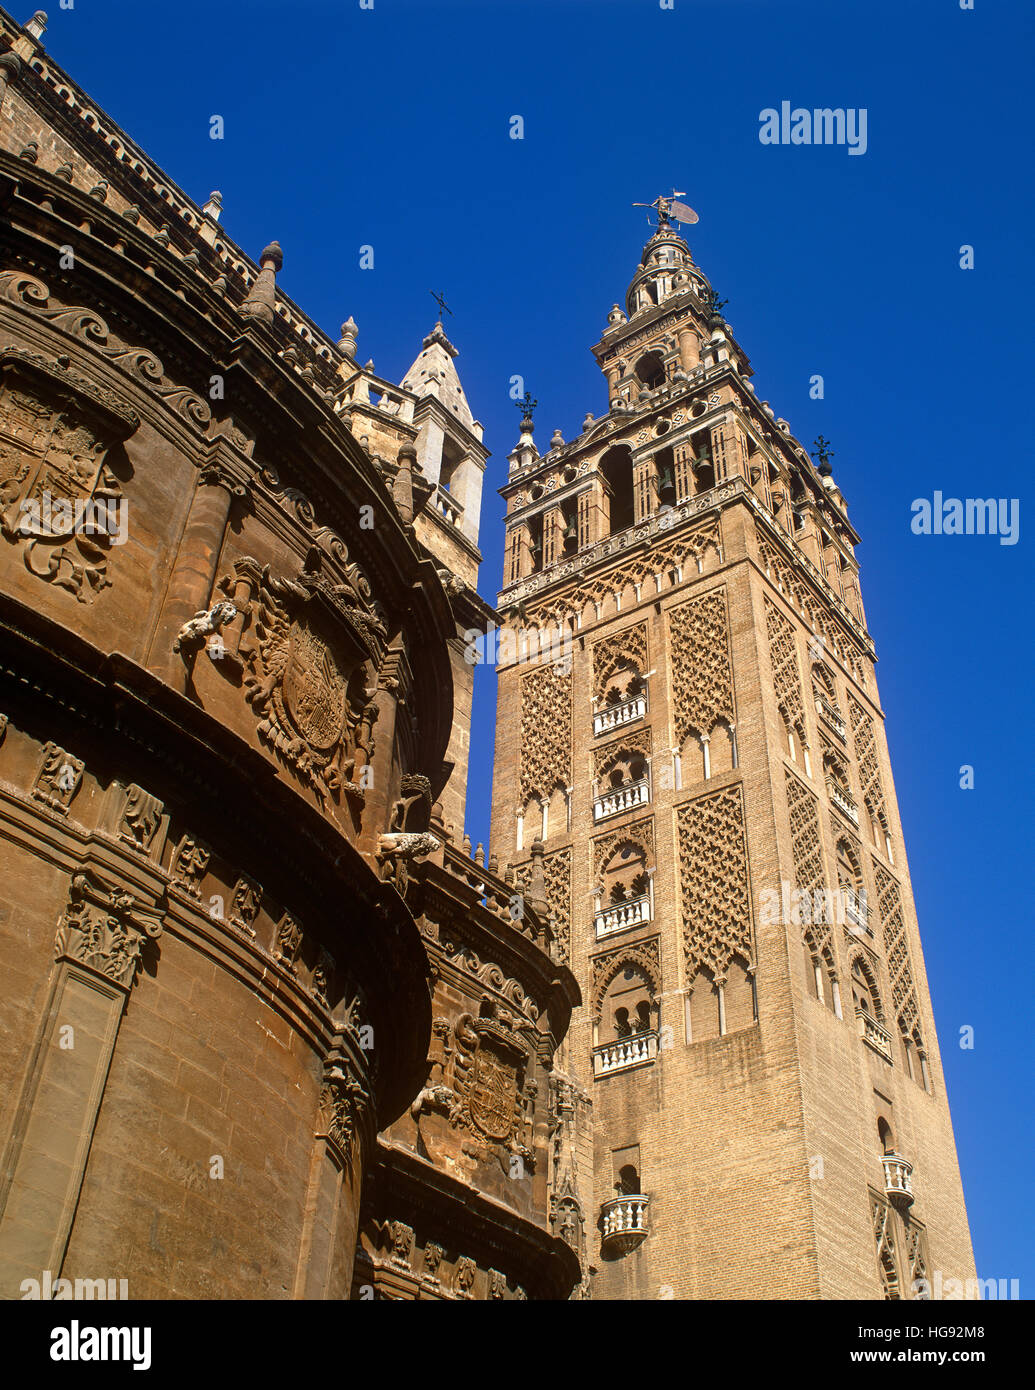 The Giralda Tower, Seville, Andalusia, Spain Stock Photo